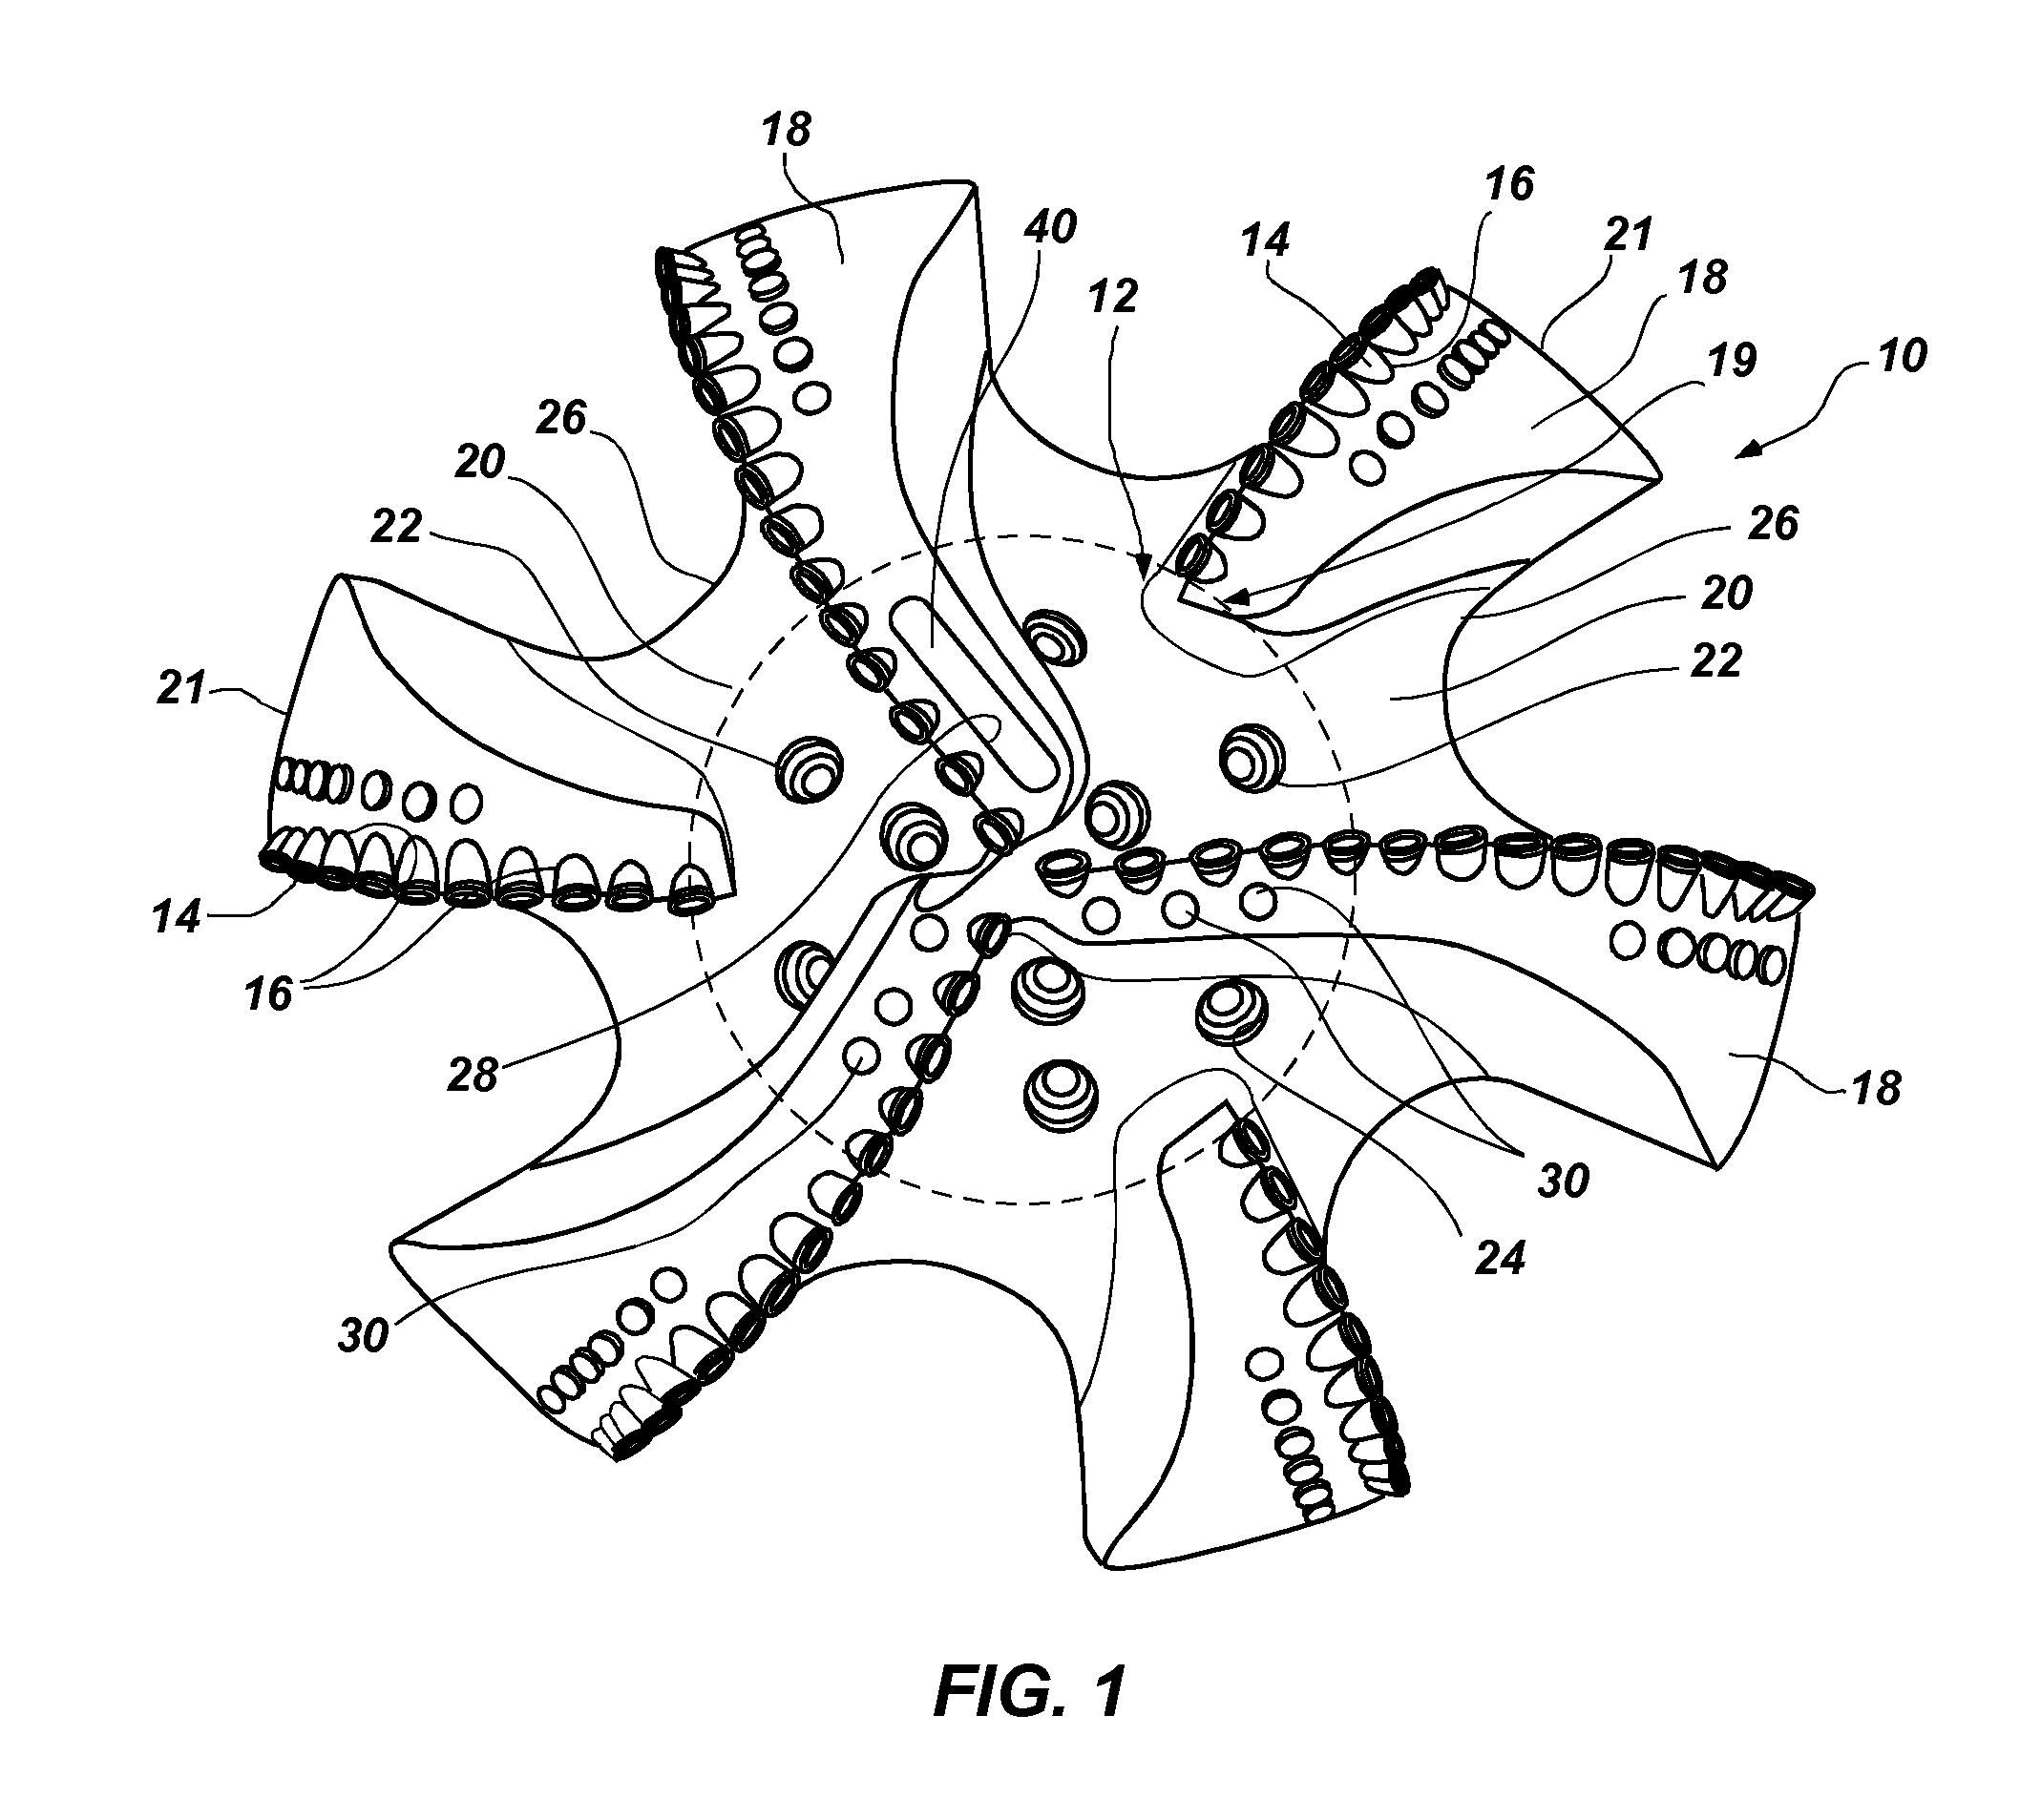 Bearing blocks for drill bits, drill bit assemblies including bearing blocks and related methods